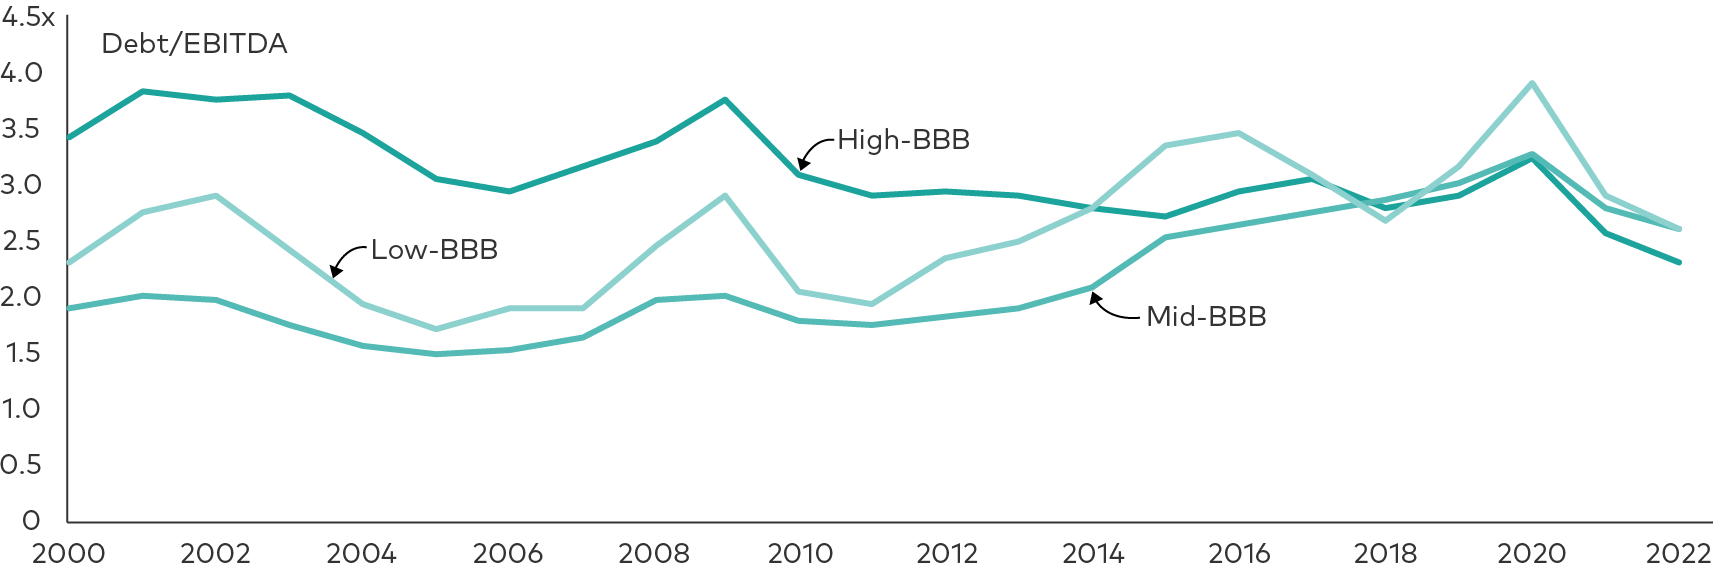  The image shows that the debt/EBITDA ratio has fluctuated since 2000 for high-, mid-, and low-rated BBB bonds. While it increased significantly in 2020 for all three categories, it has since fallen and is expected to continue declining through 2022.